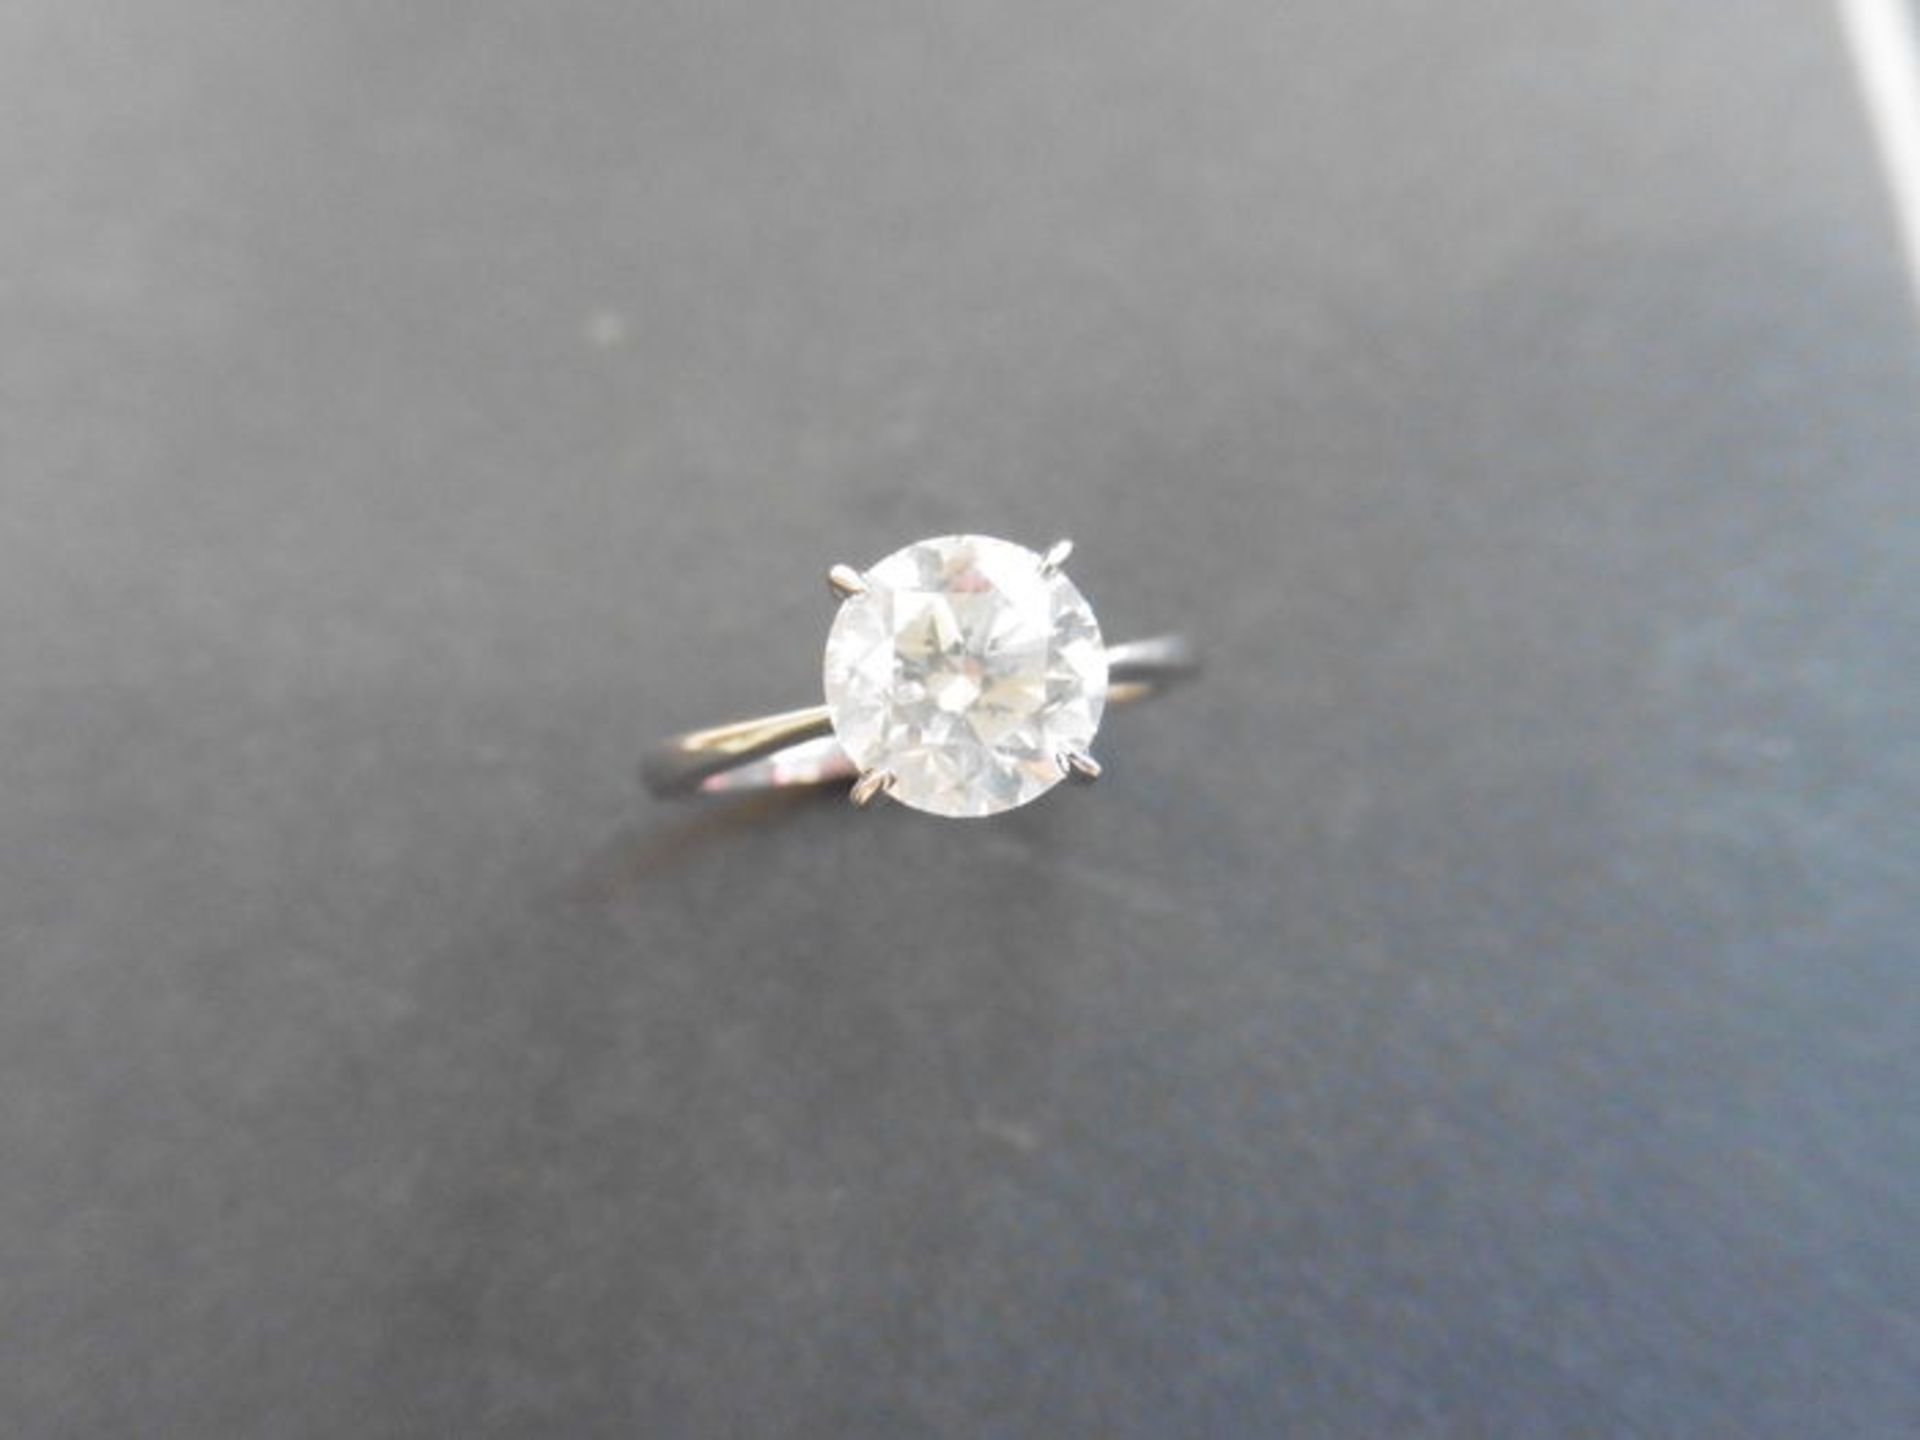 1.32Ct Diamond Solitaire Ring With An Brilliant Cut Diamond.